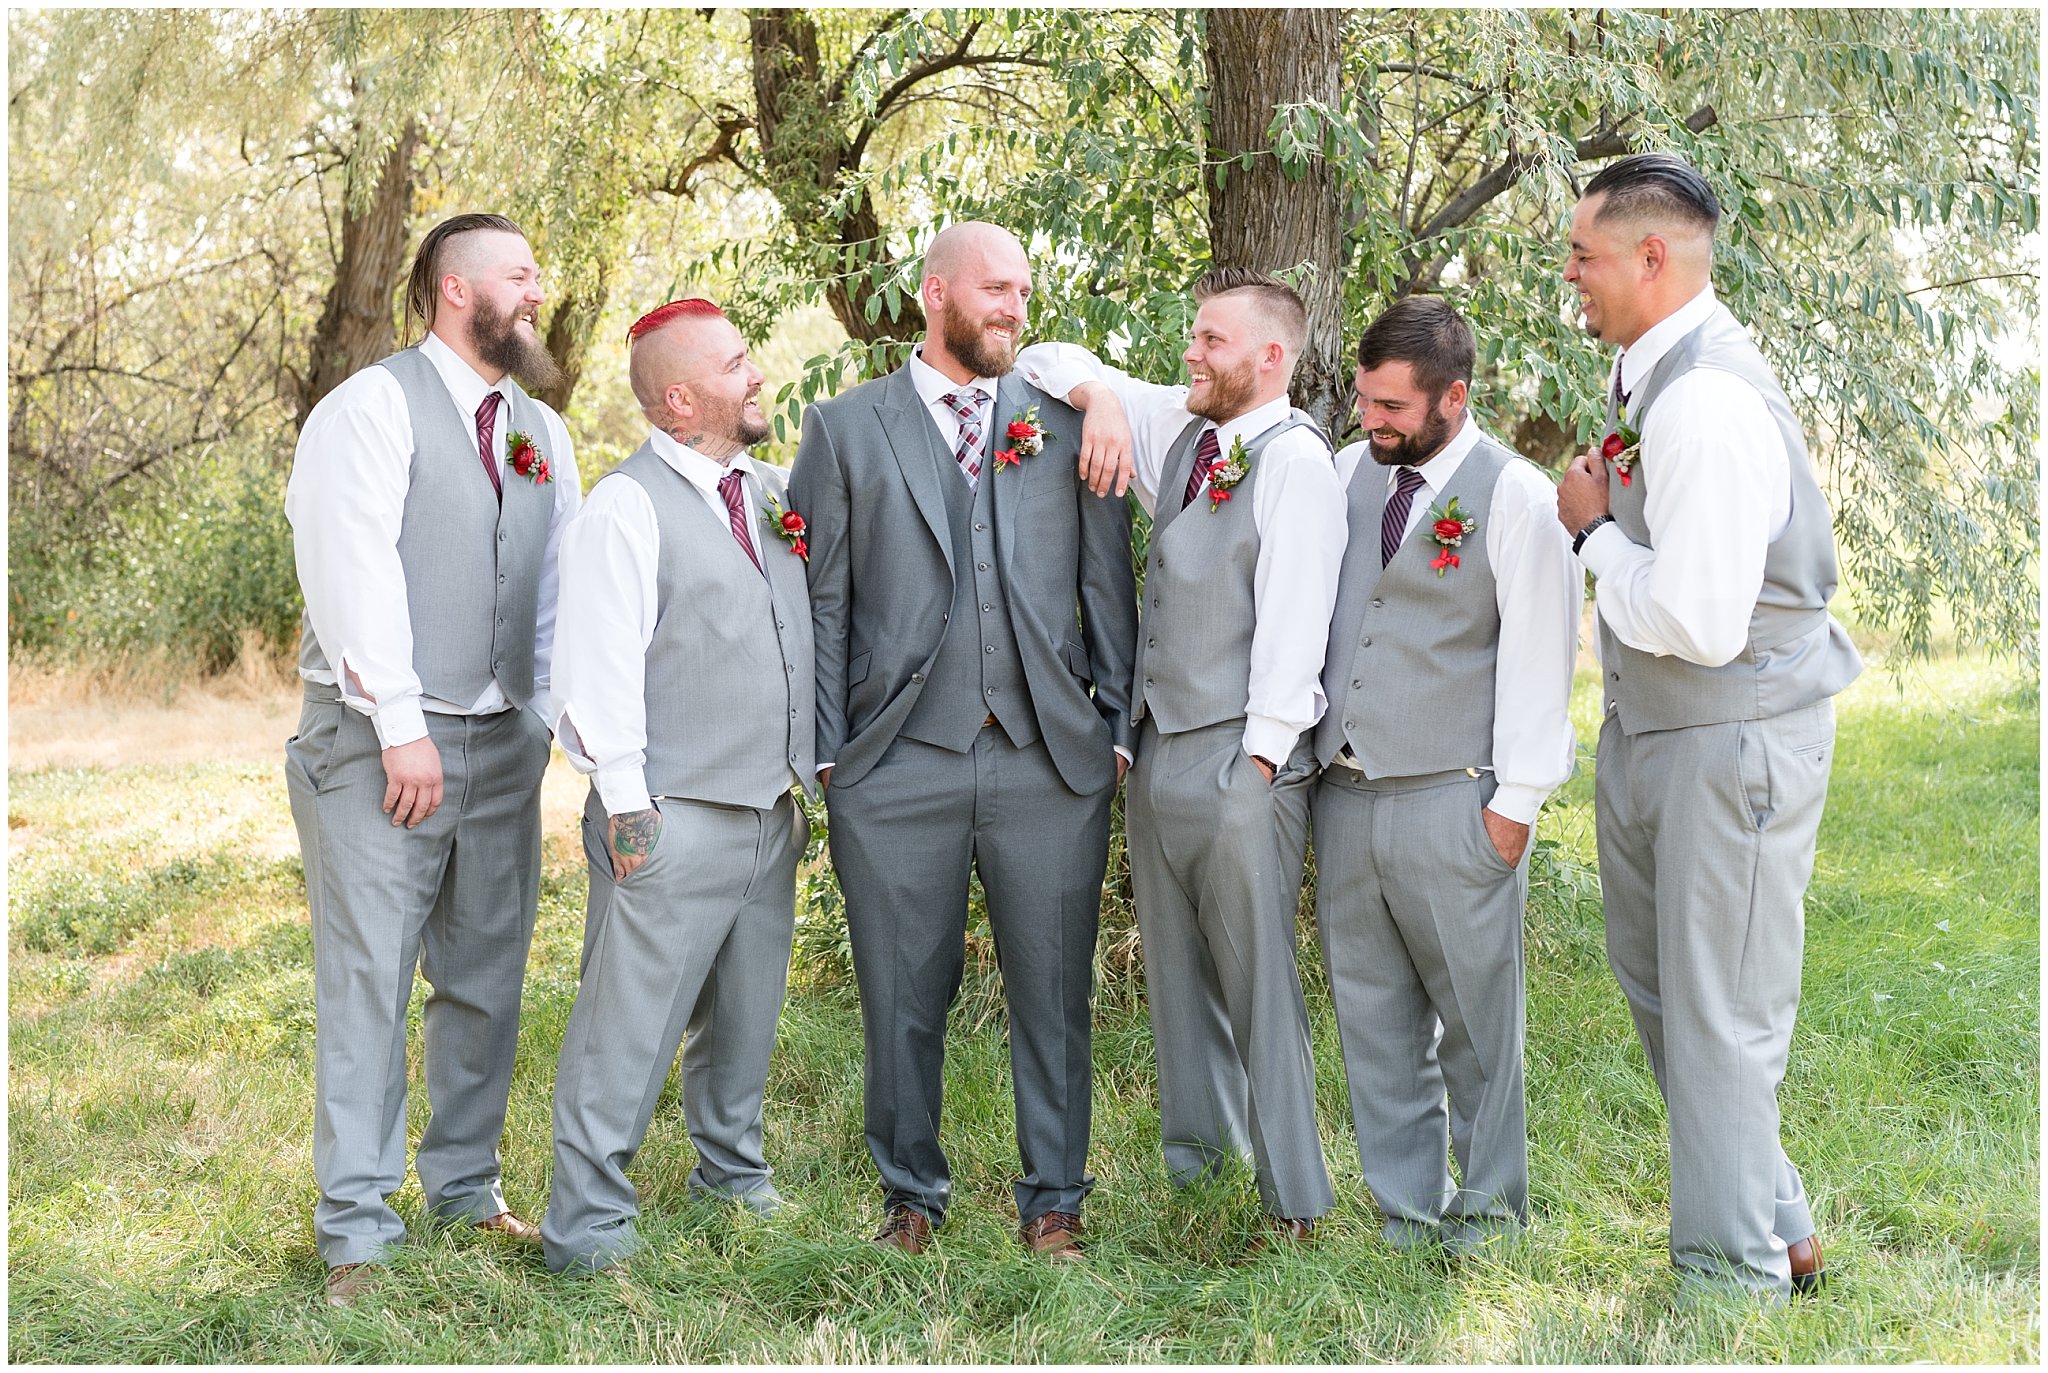 Groom and groomsmen laughing candidly | Davis County Outdoor Wedding | Jessie and Dallin Photography